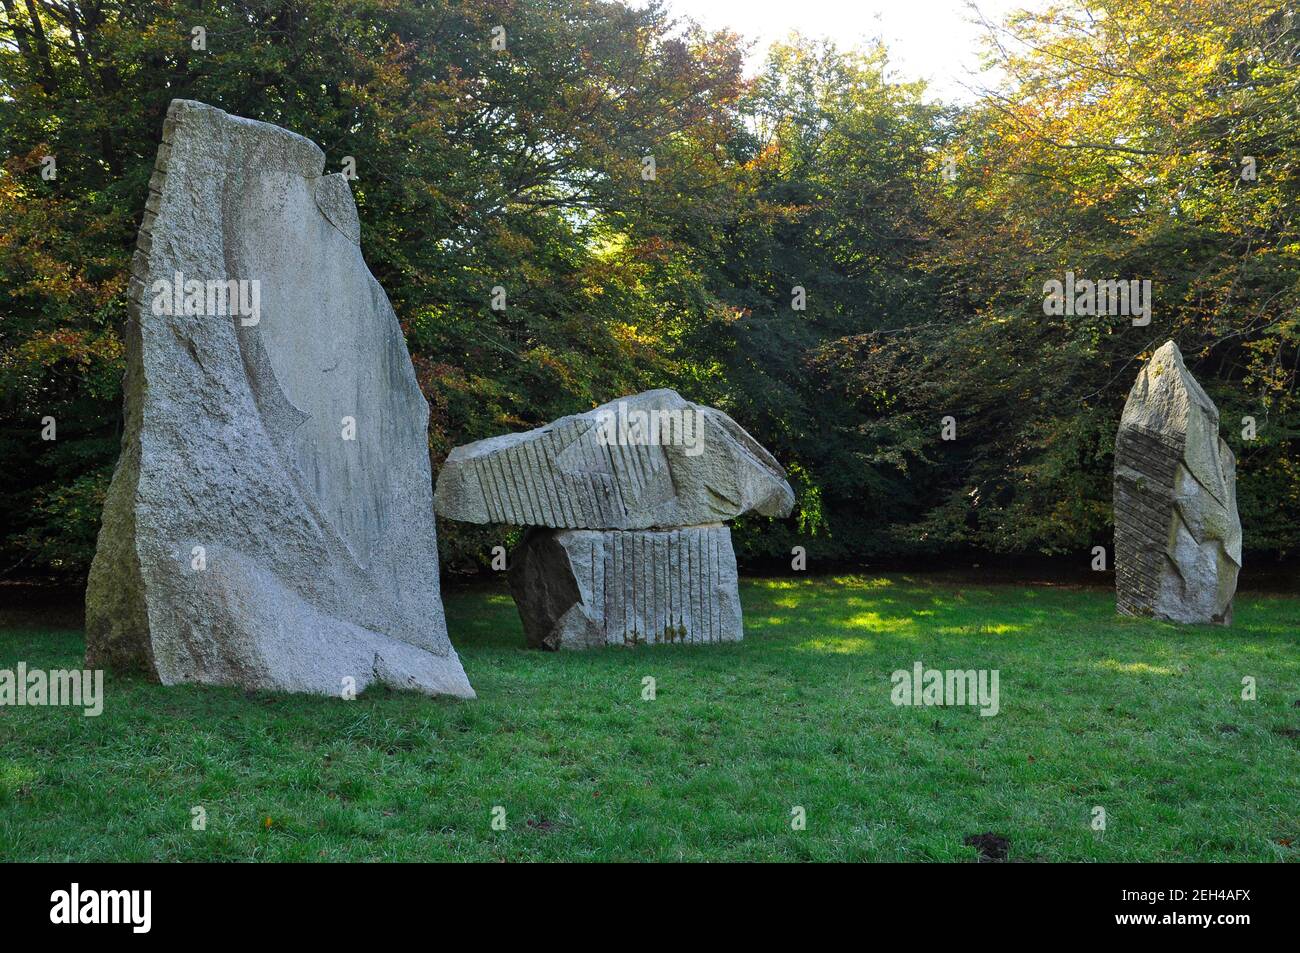 Standing Stones in the autumn sunshine at Heavens gate, overlooking  Longleat House , Longleat ,Wiltshire,UK Stock Photo